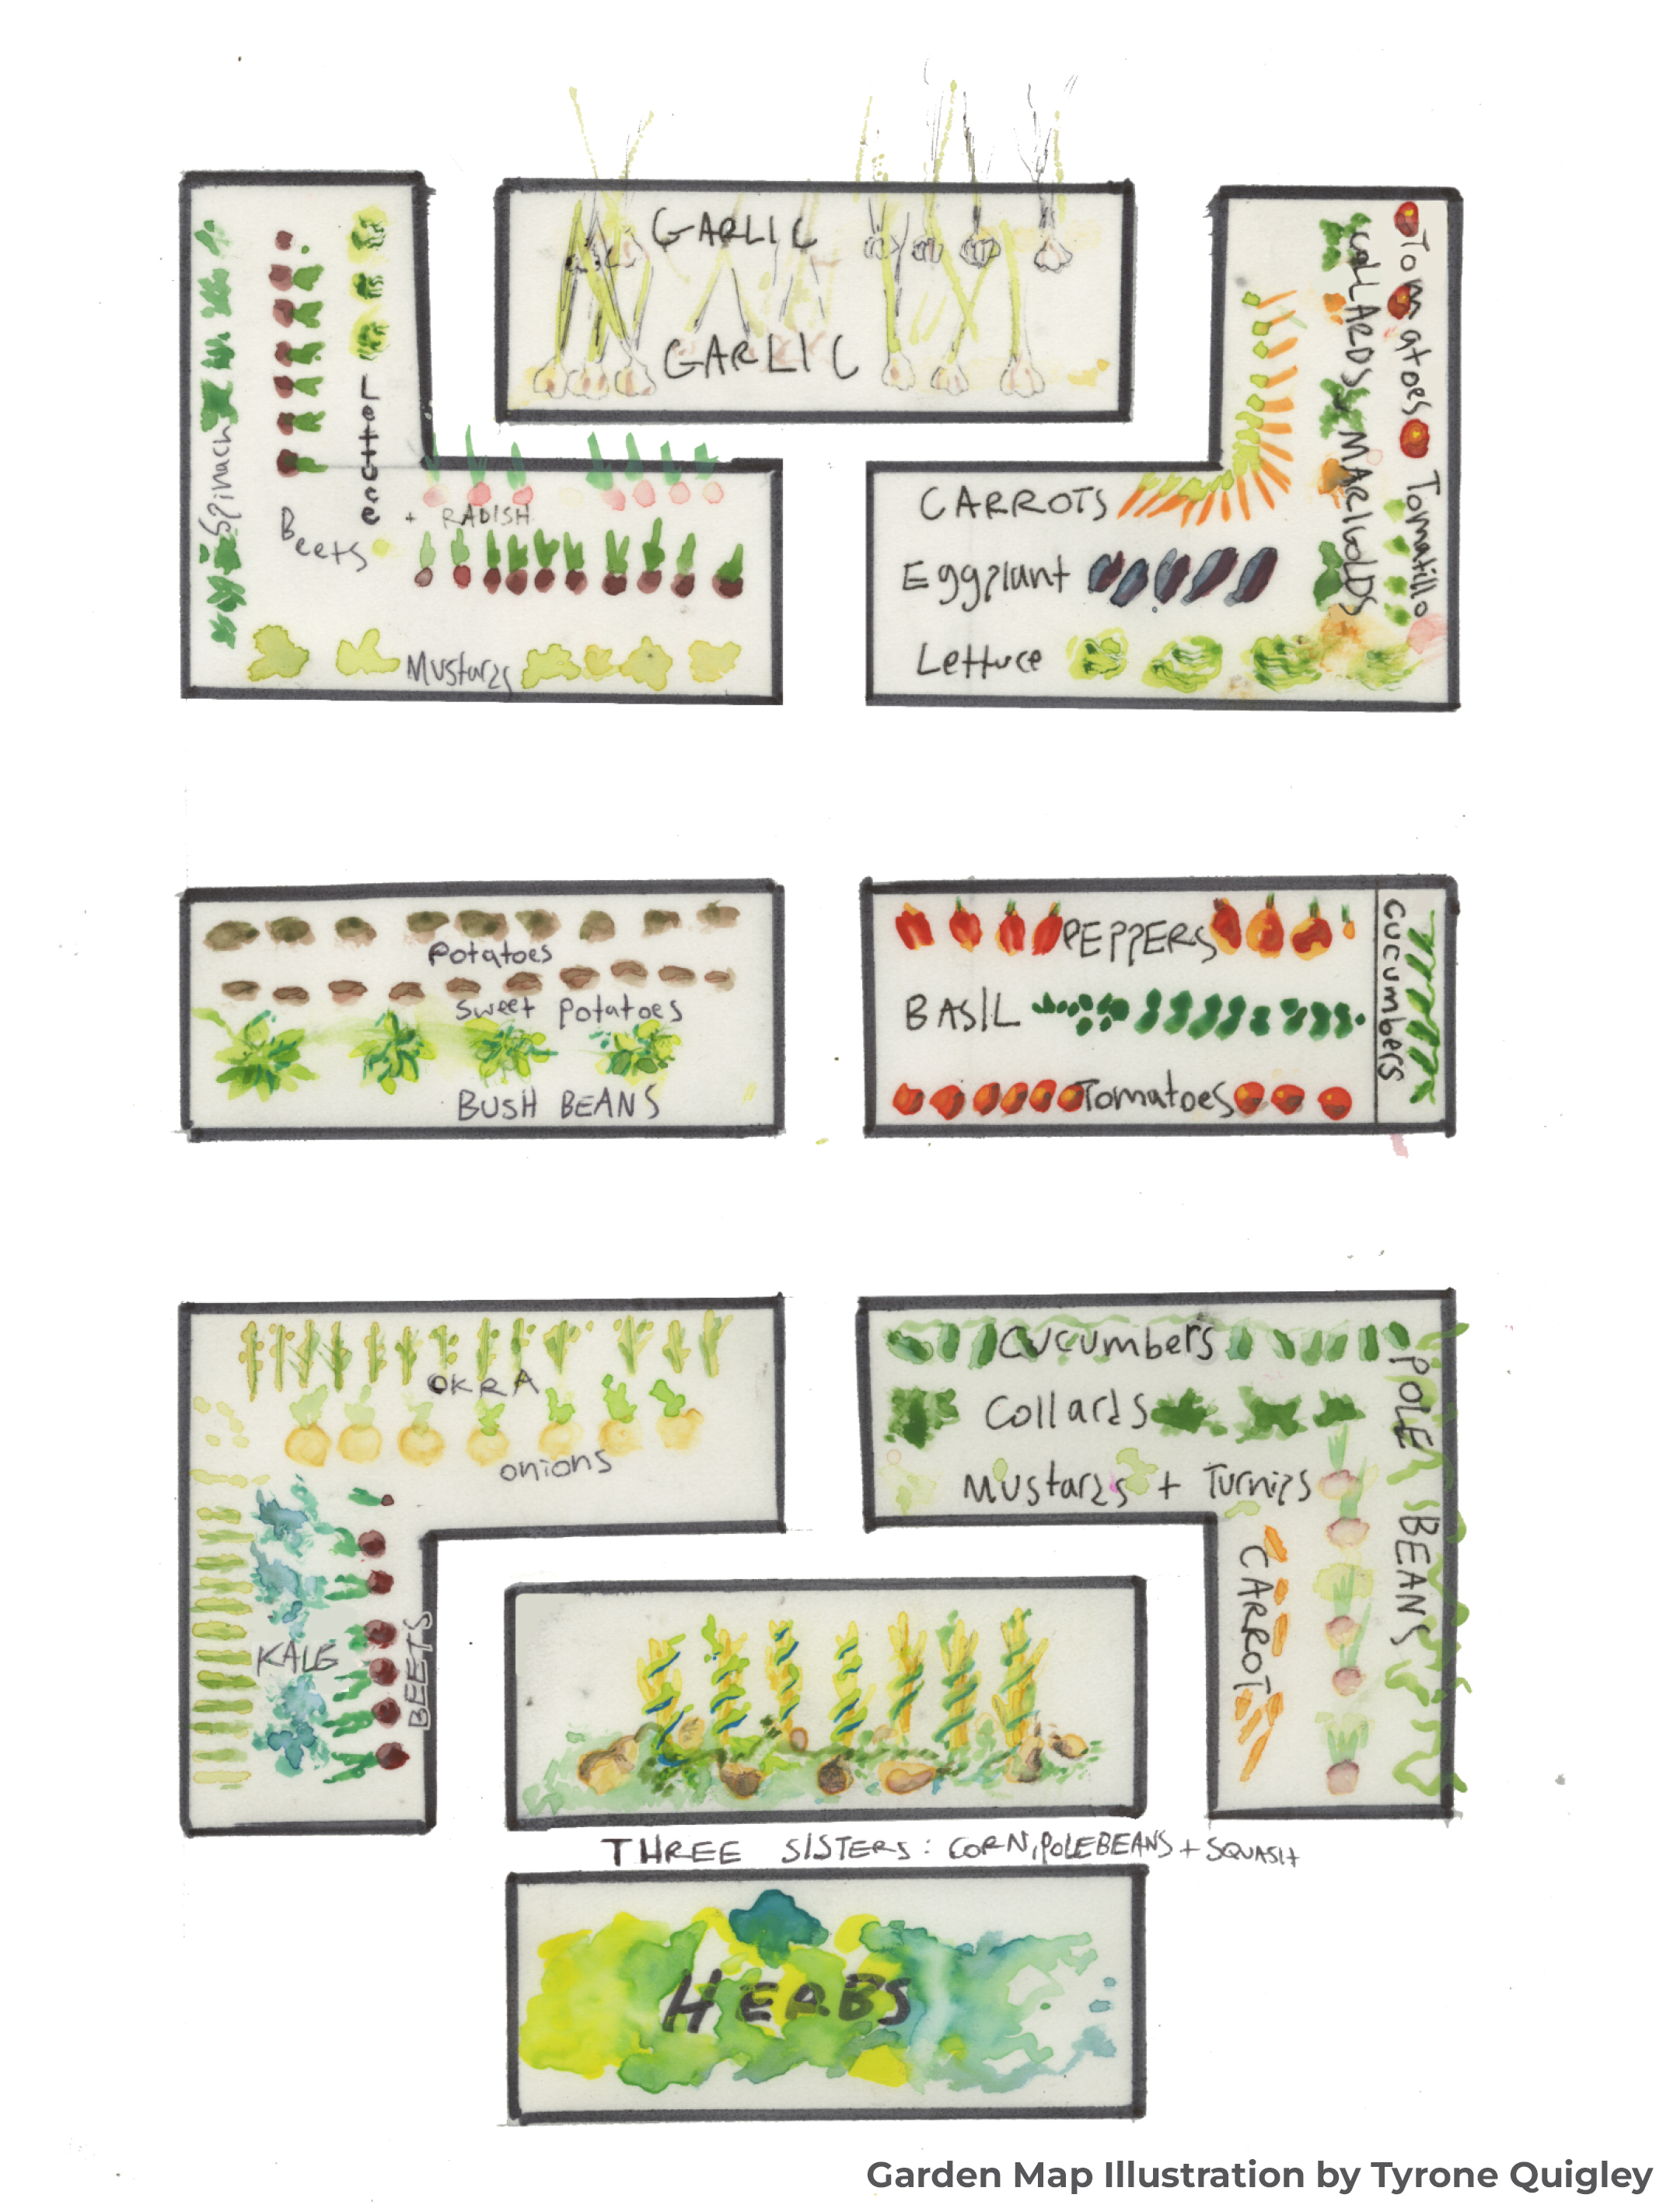 A watercolor painting of the planting layout of the garden beds